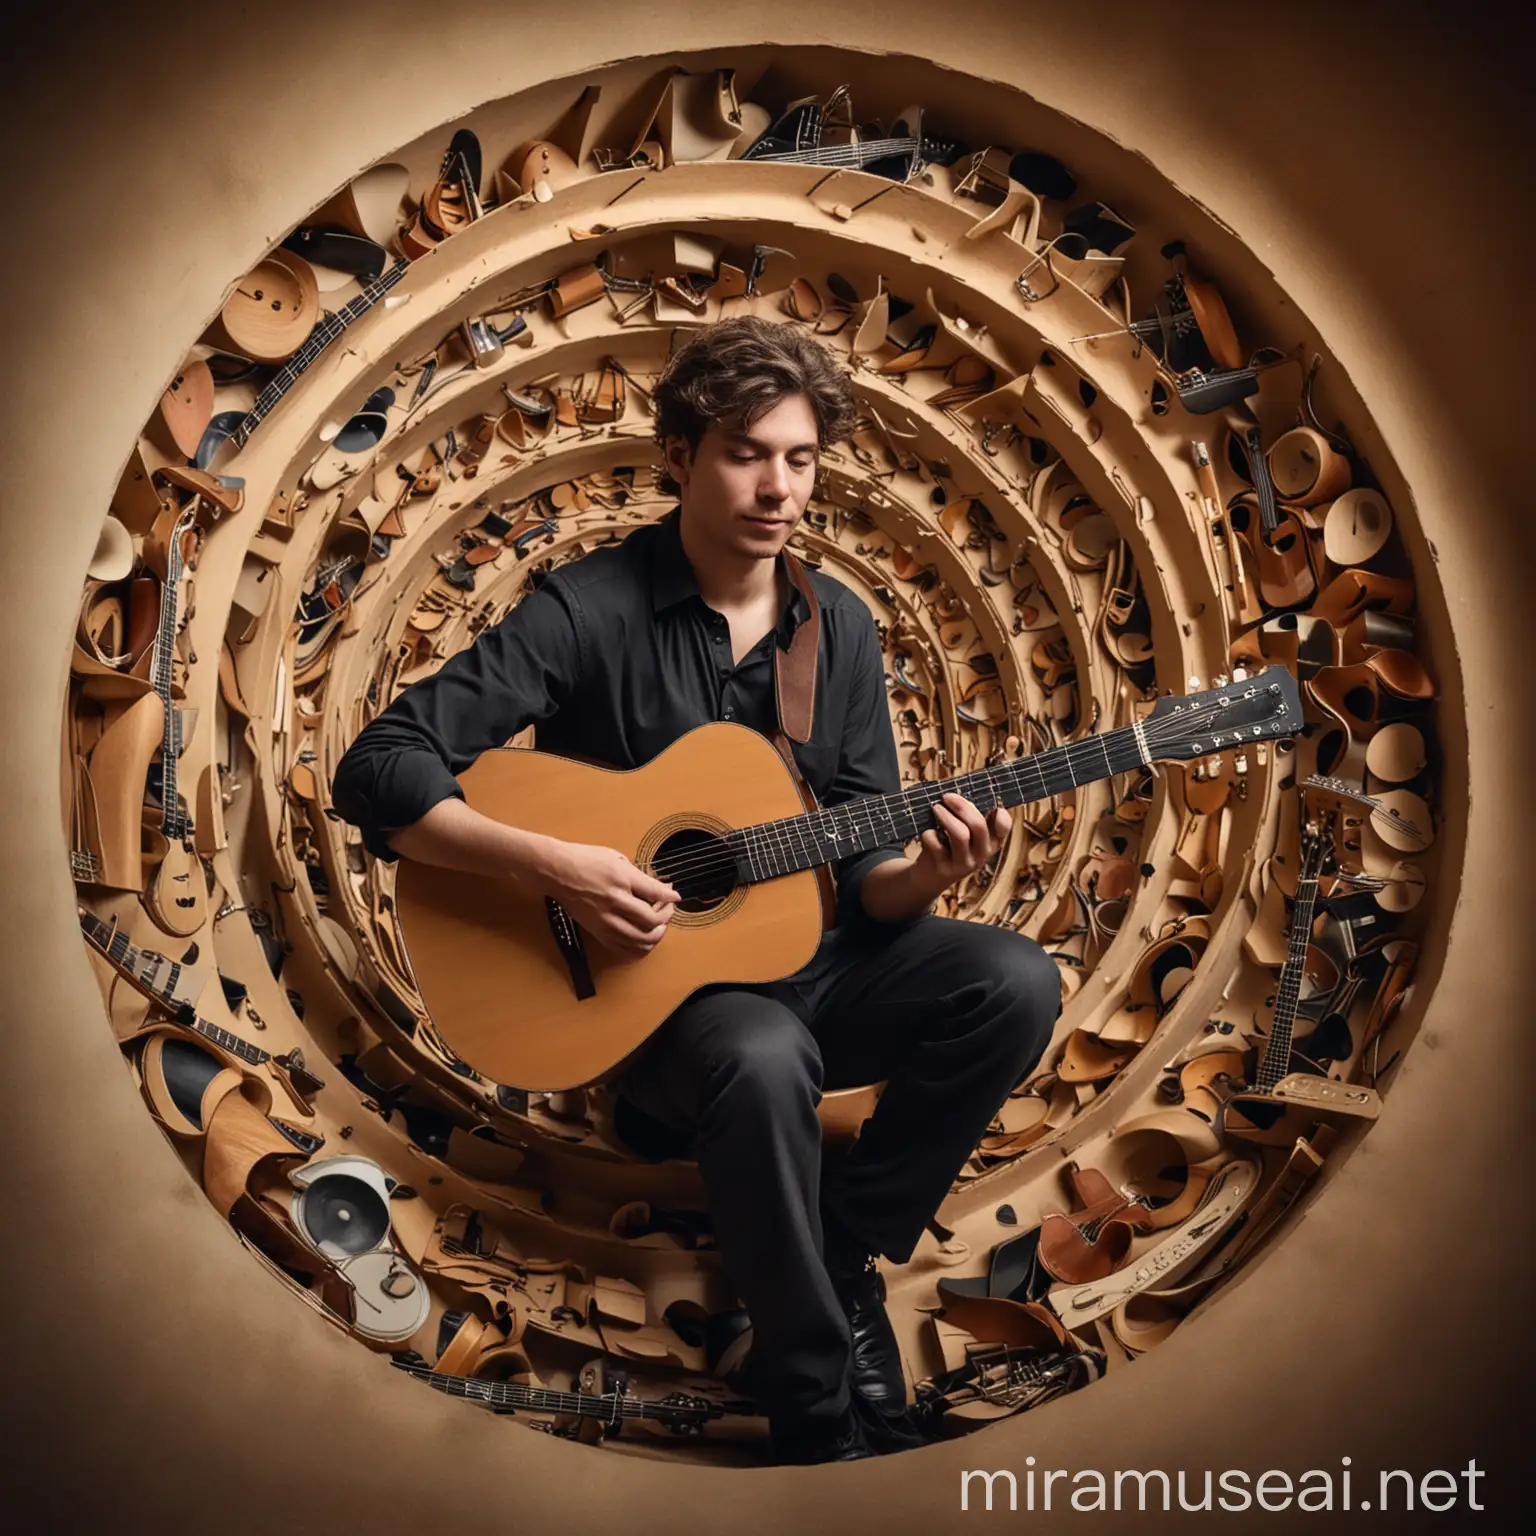 Portrait guitarist man shaded between a spiral and scattered instruments